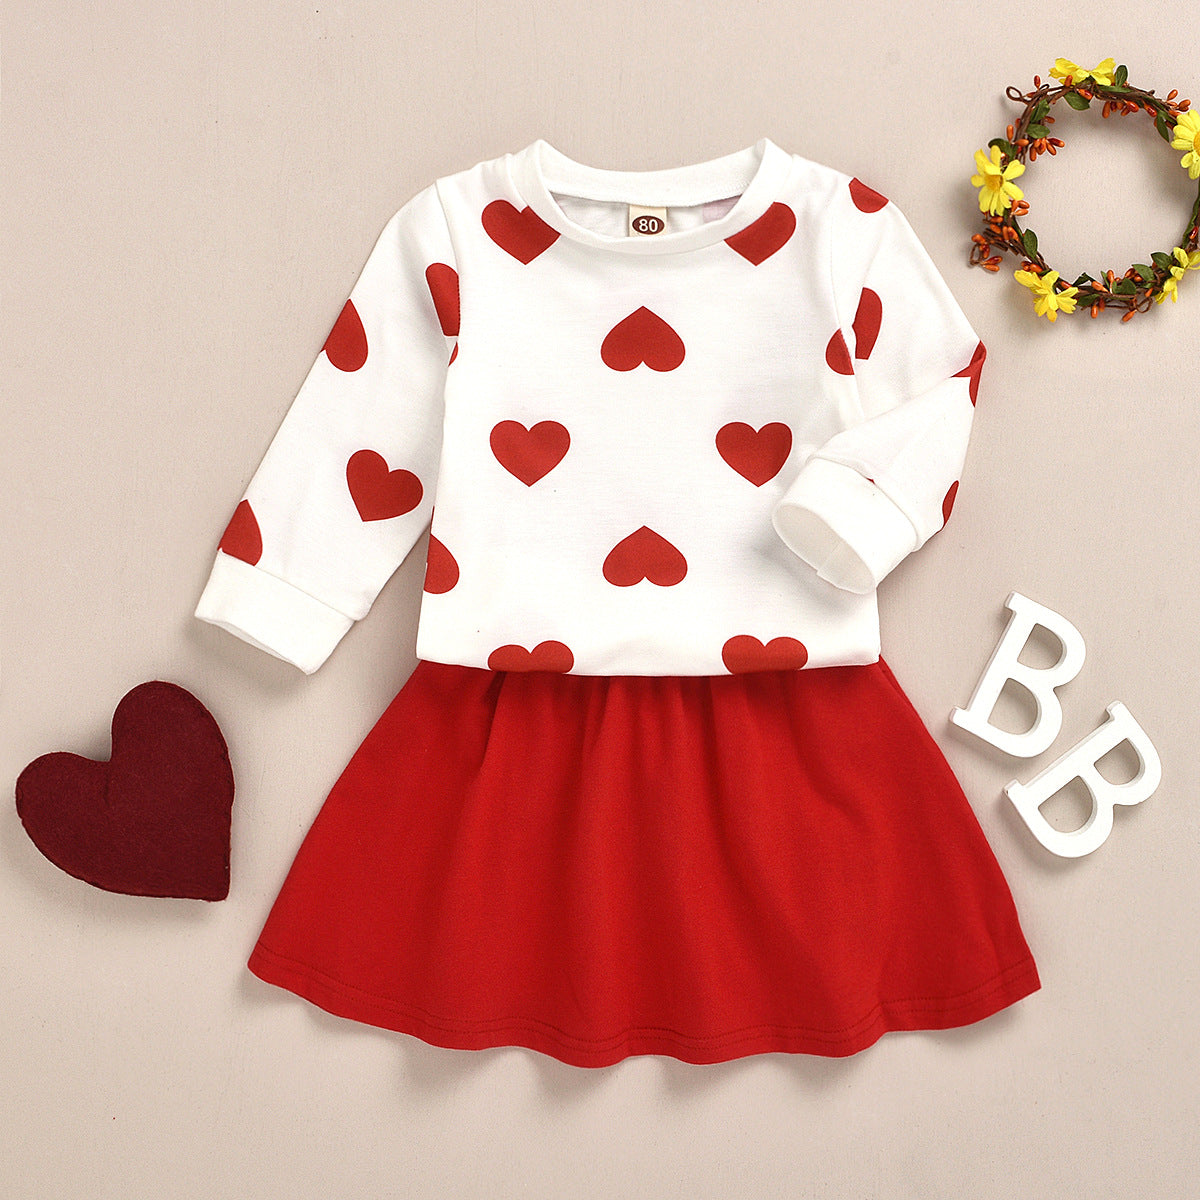 www.houseofclaire.com baby store near me Red hearts white dress set children’s boutique near  me by House of Claire kids online India kid stores near me